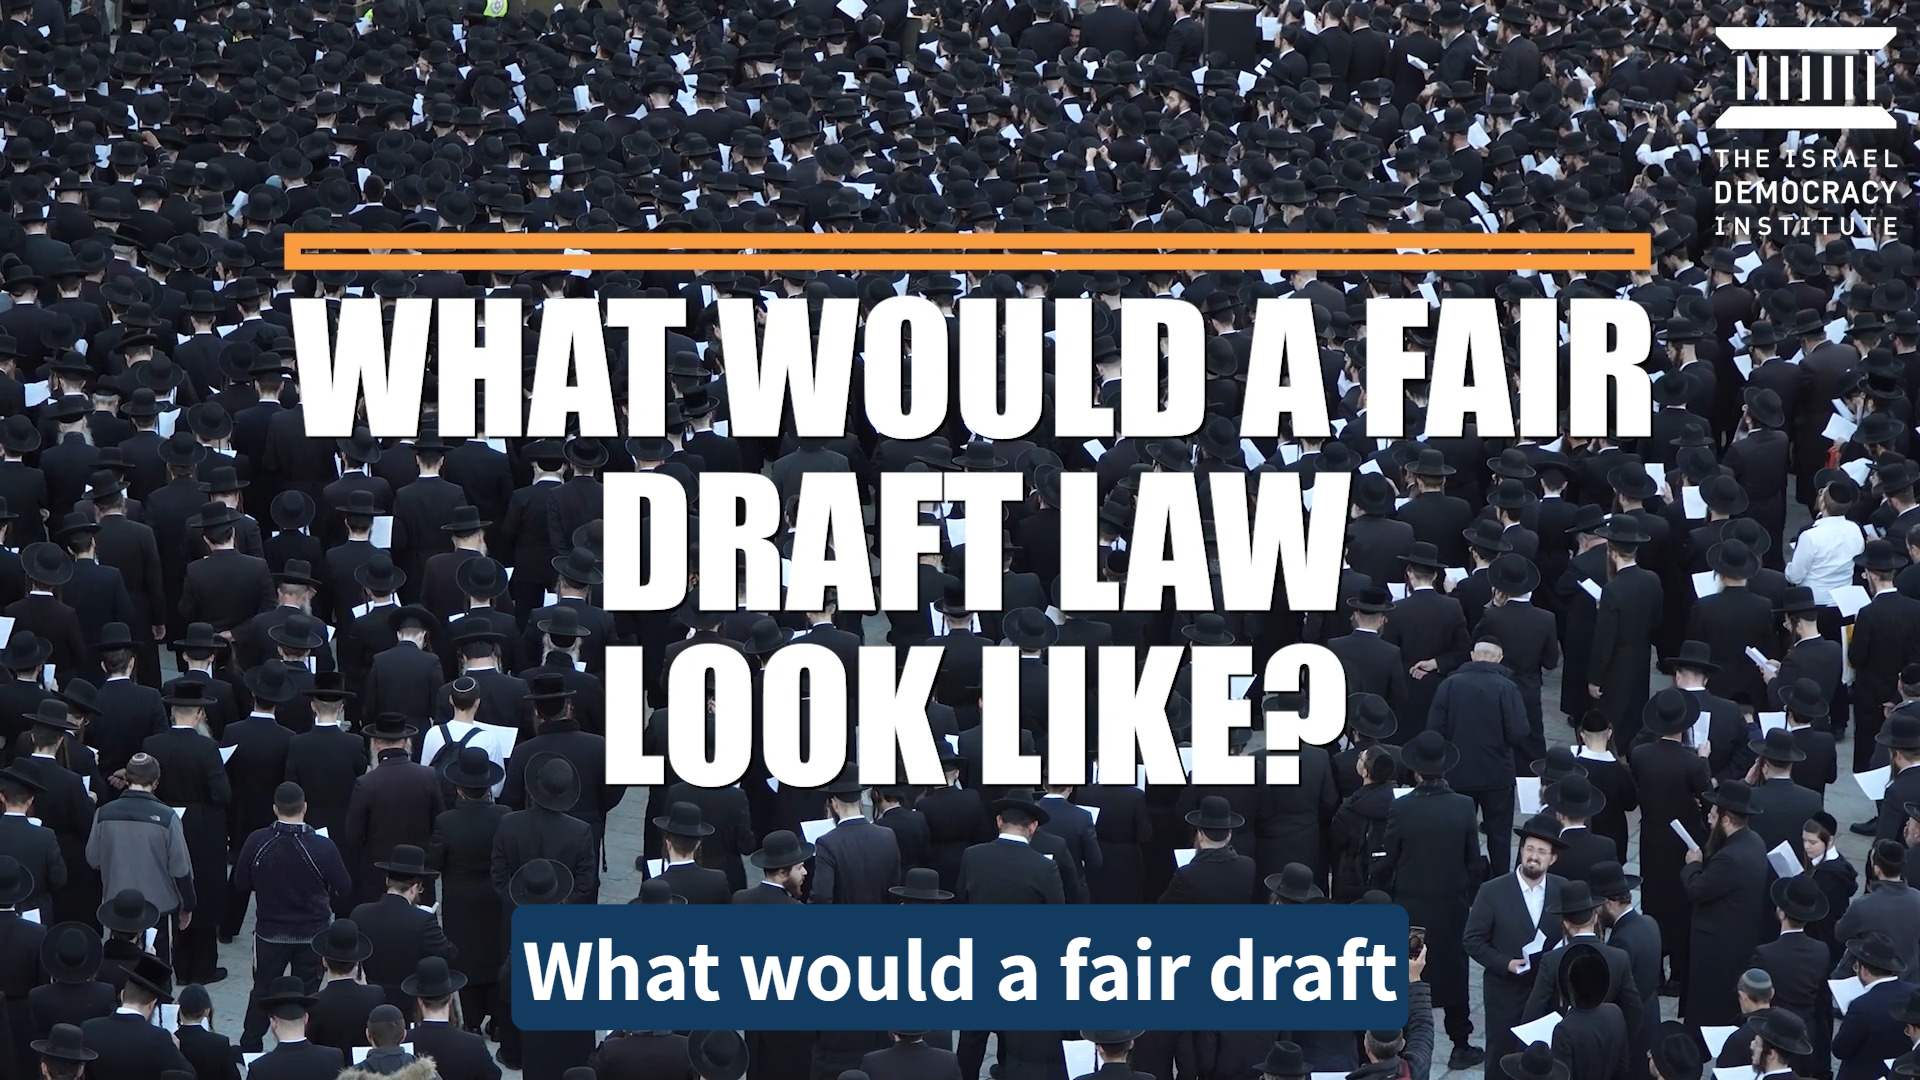 A Fair Draft Law, What Would That Look Like? 